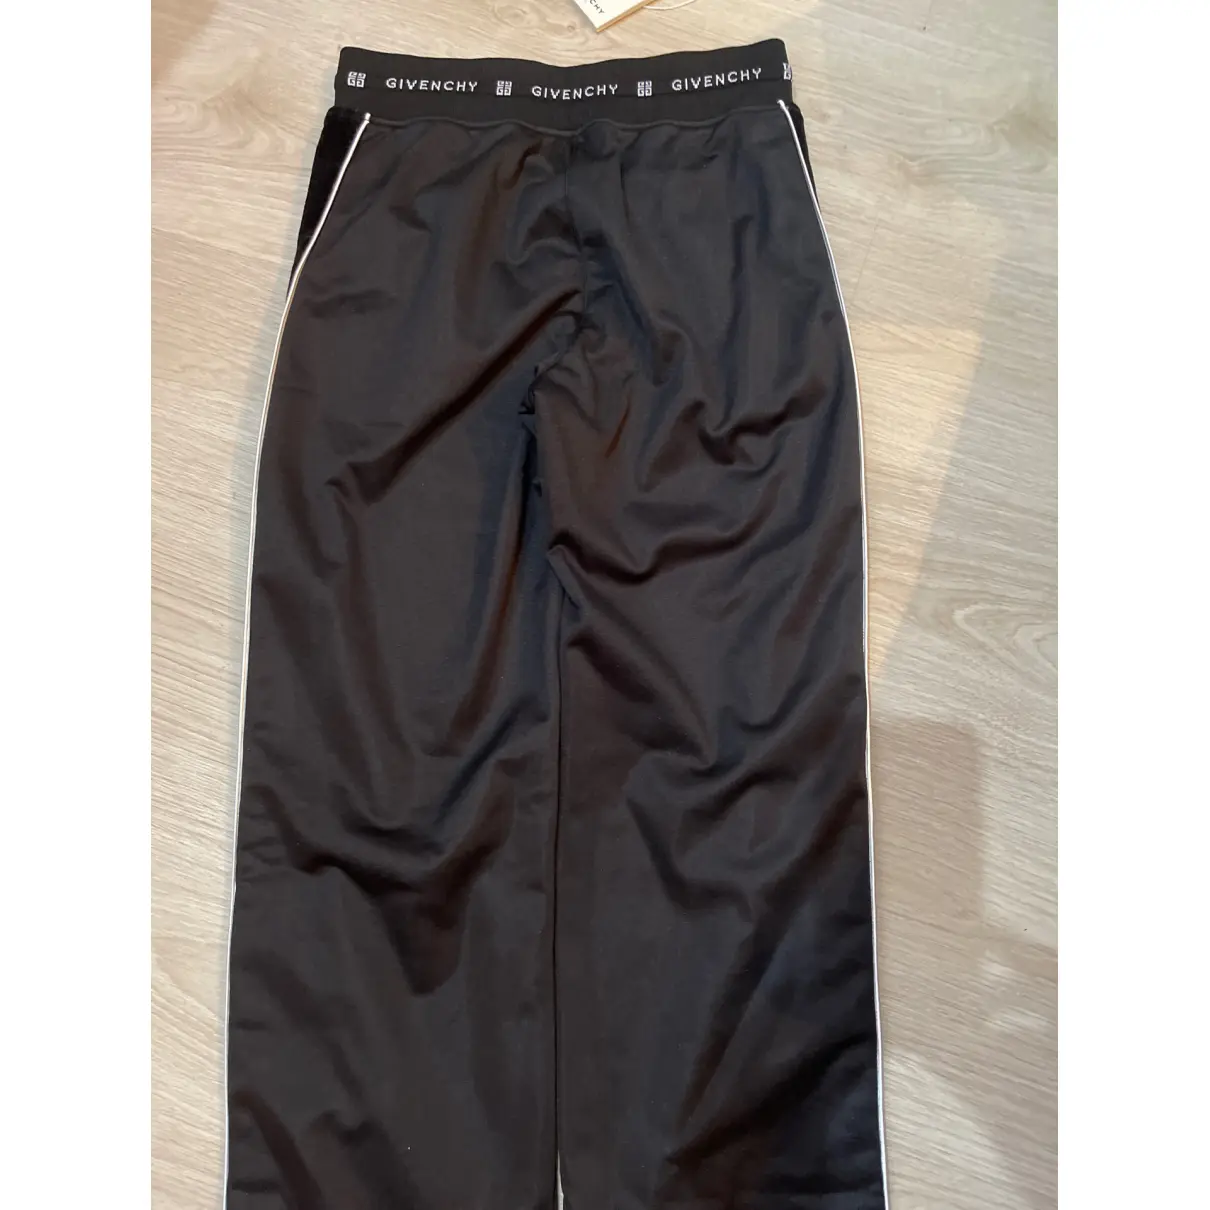 Buy Givenchy Trousers online